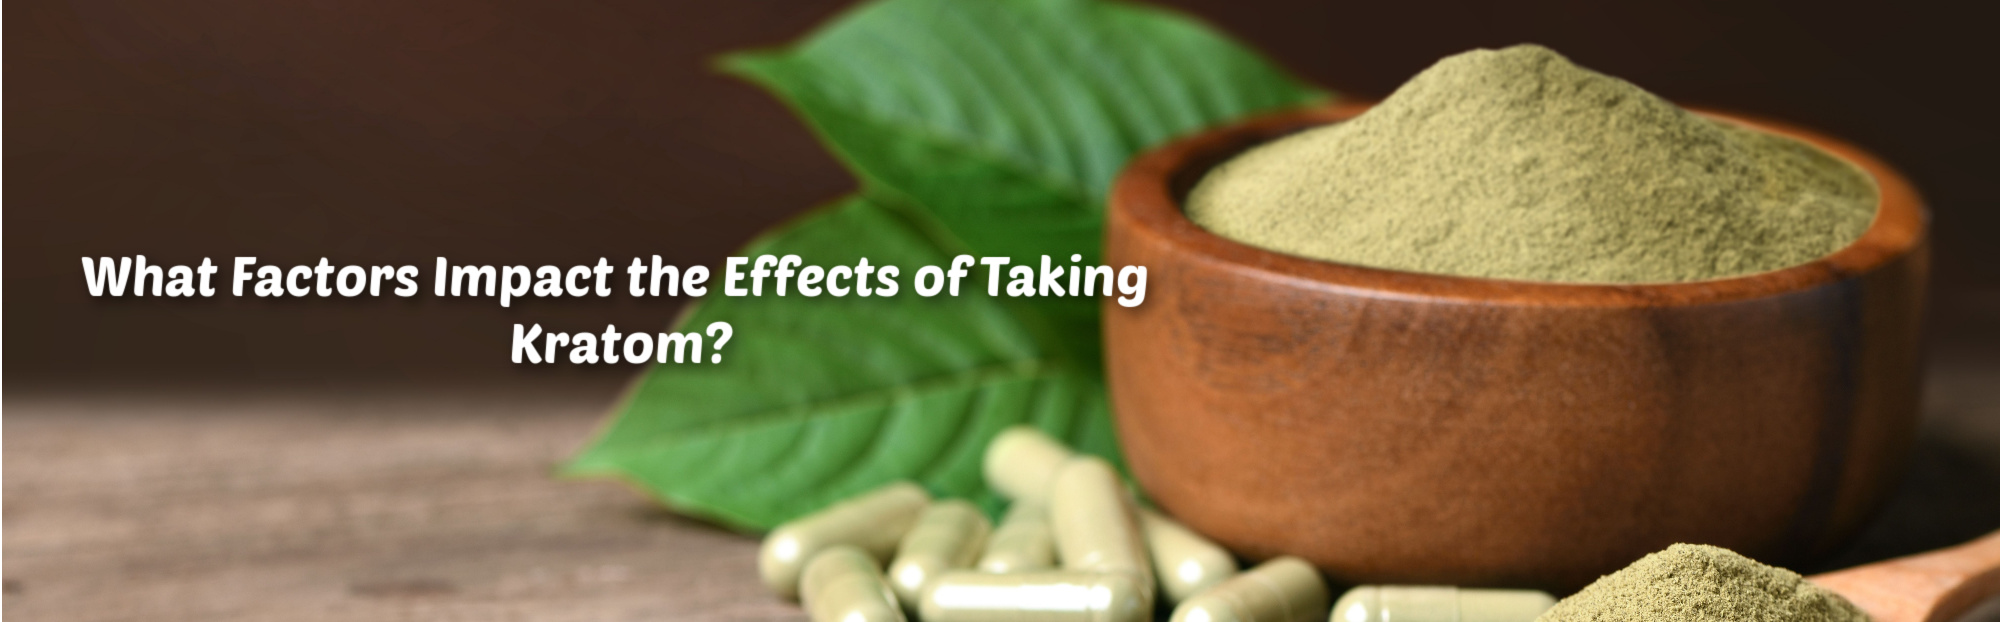 image of what are the factors impact the effects of taking kratom